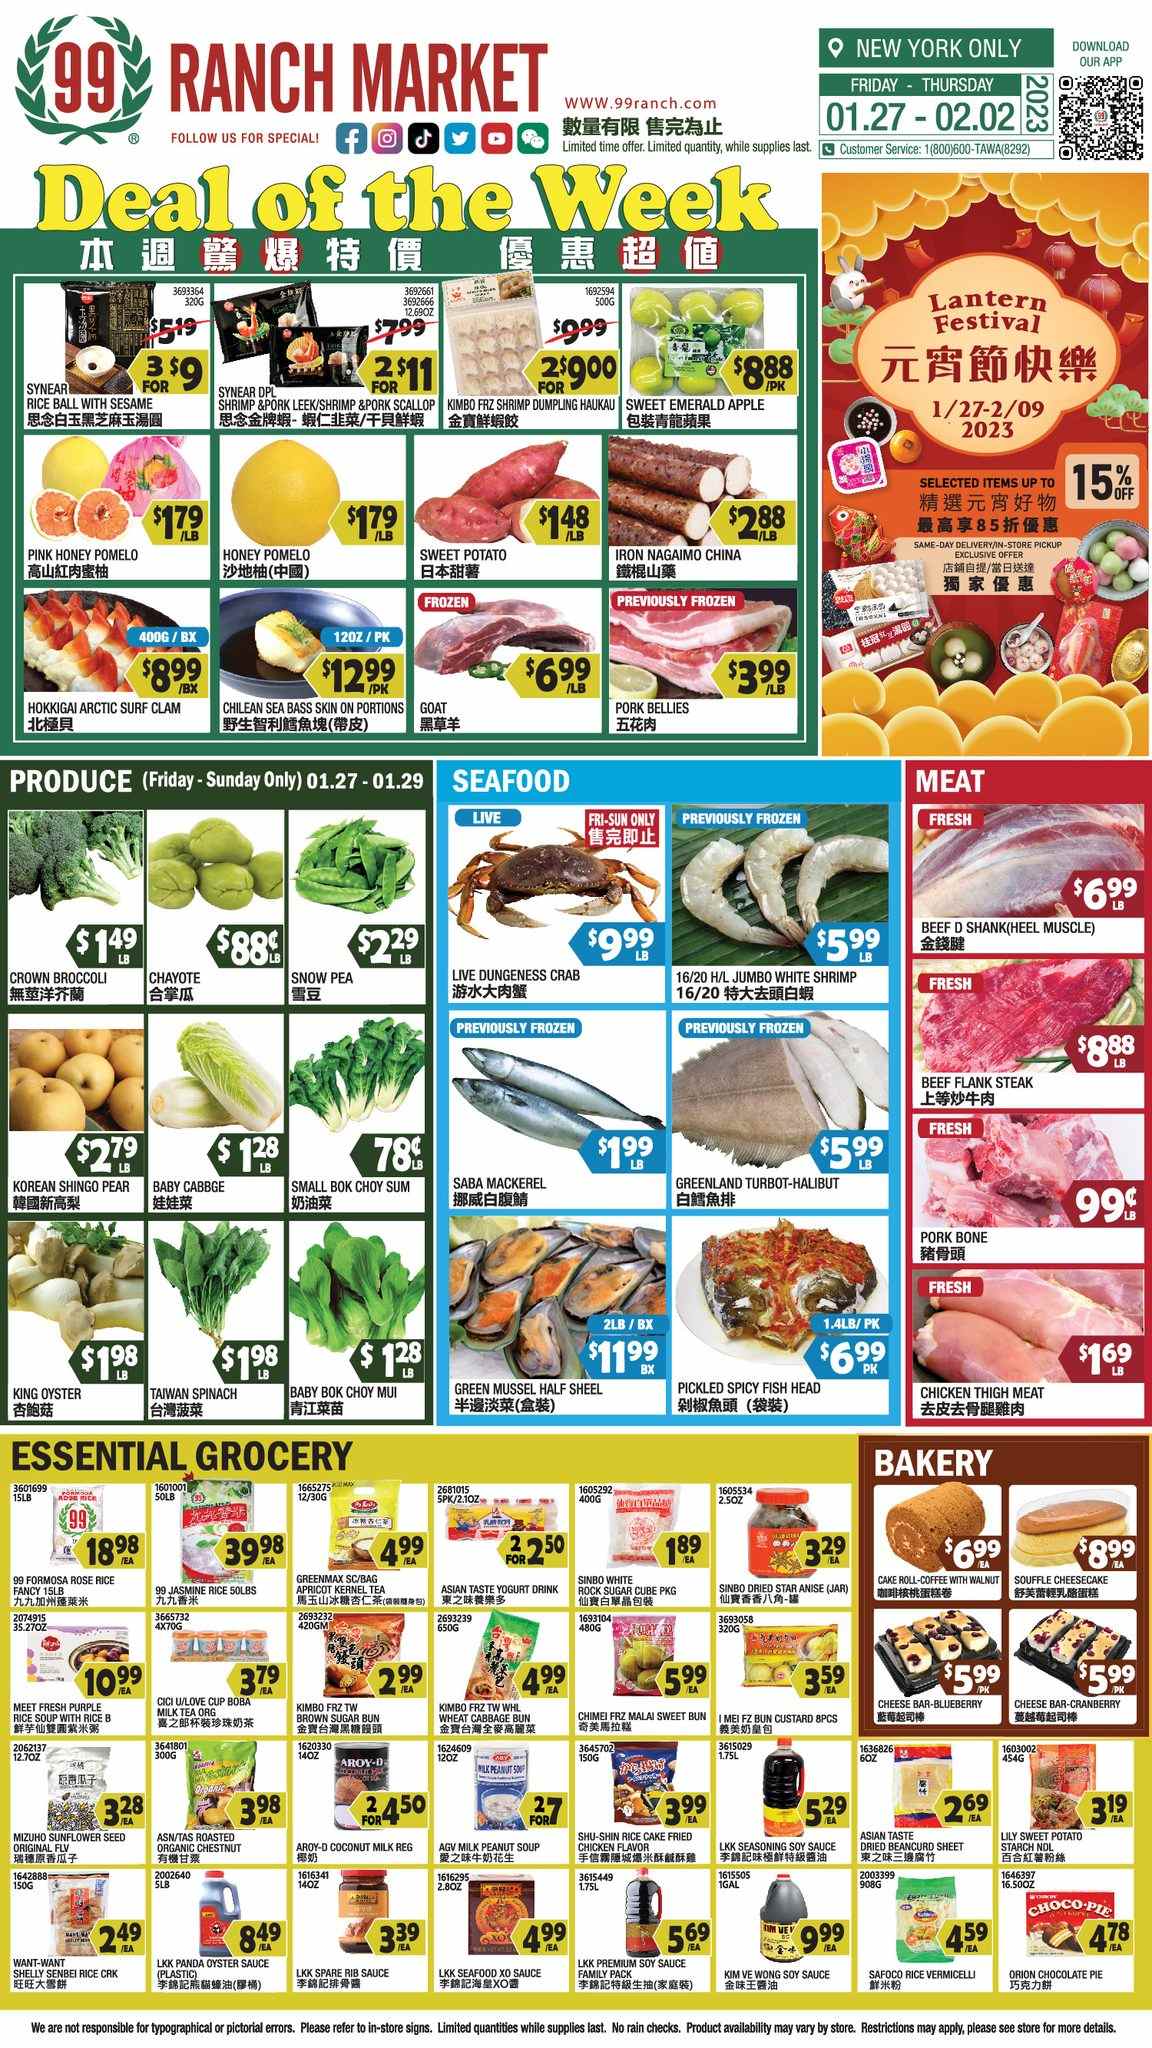 thumbnail - 99 Ranch Market Flyer - 01/27/2023 - 02/02/2023 - Sales products - pie, cheesecake, bok choy, broccoli, cabbage, leek, sweet potato, pears, chayote, pomelo, clams, mackerel, mussels, scallops, sea bass, halibut, oysters, turbot, seafood, crab, fish, shrimps, soup, sauce, fried chicken, dumplings, cheese, custard, yoghurt, yoghurt drink, chocolate, cane sugar, starch, potato starch, coconut milk, jasmine rice, rice vermicelli, spice, soy sauce, oyster sauce, honey, tea, coffee, rosé wine, beef meat, steak, flank steak, pork belly, Surf, cup, jar, nagaimo. Page 1.